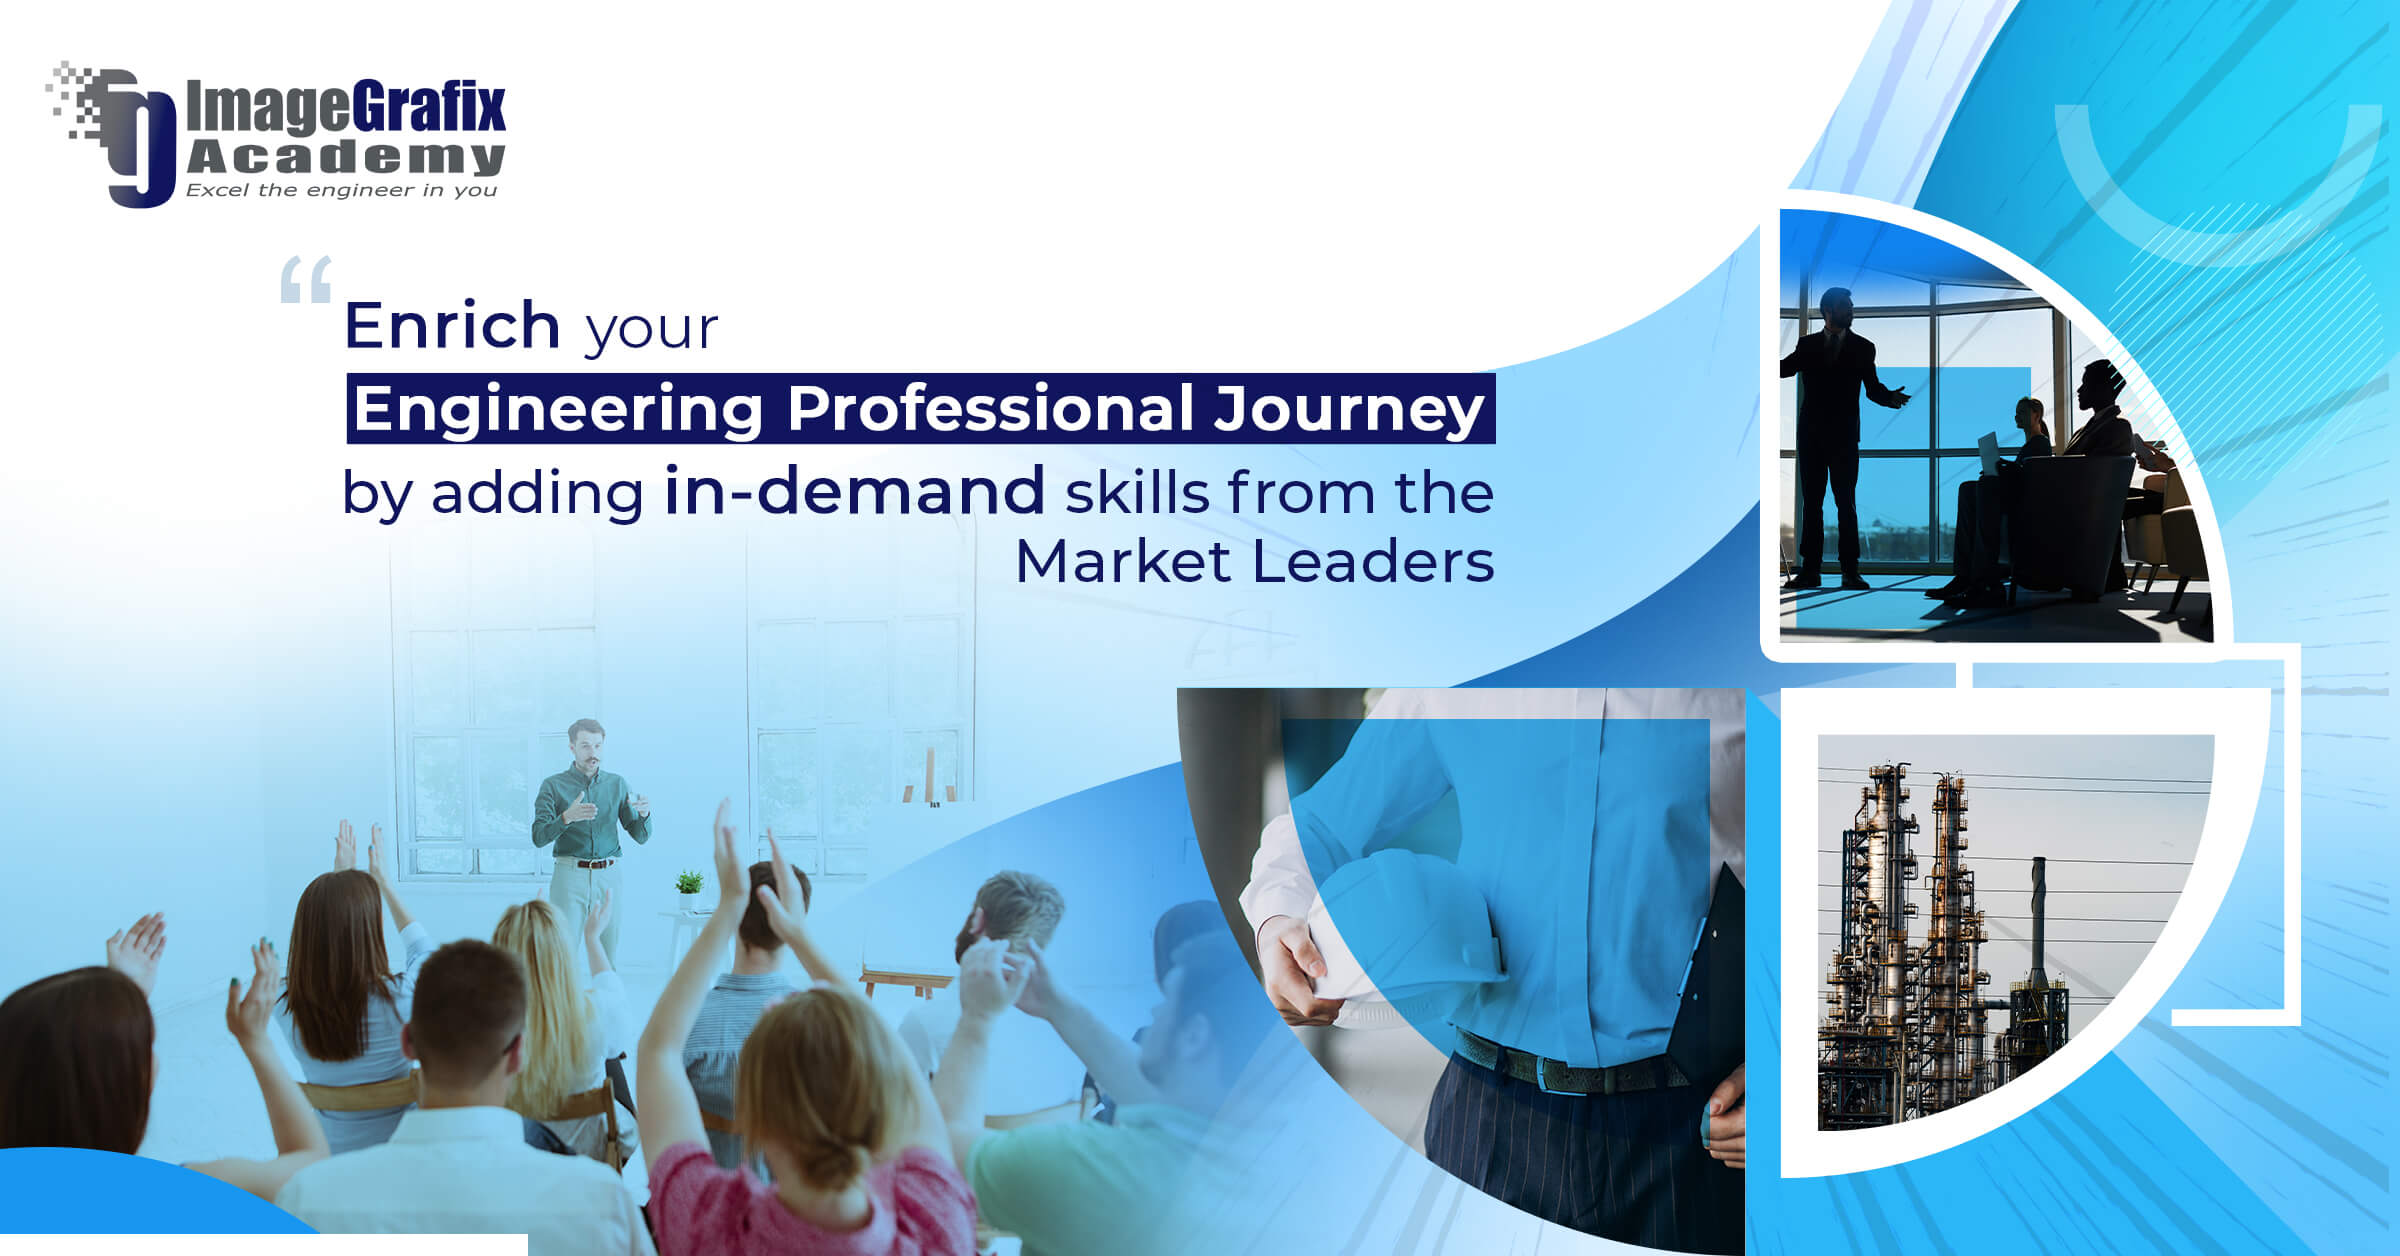 ImageGrafix Academy Blog - Enrich your engineering professional journey by adding in-demand skills from the market leaders!